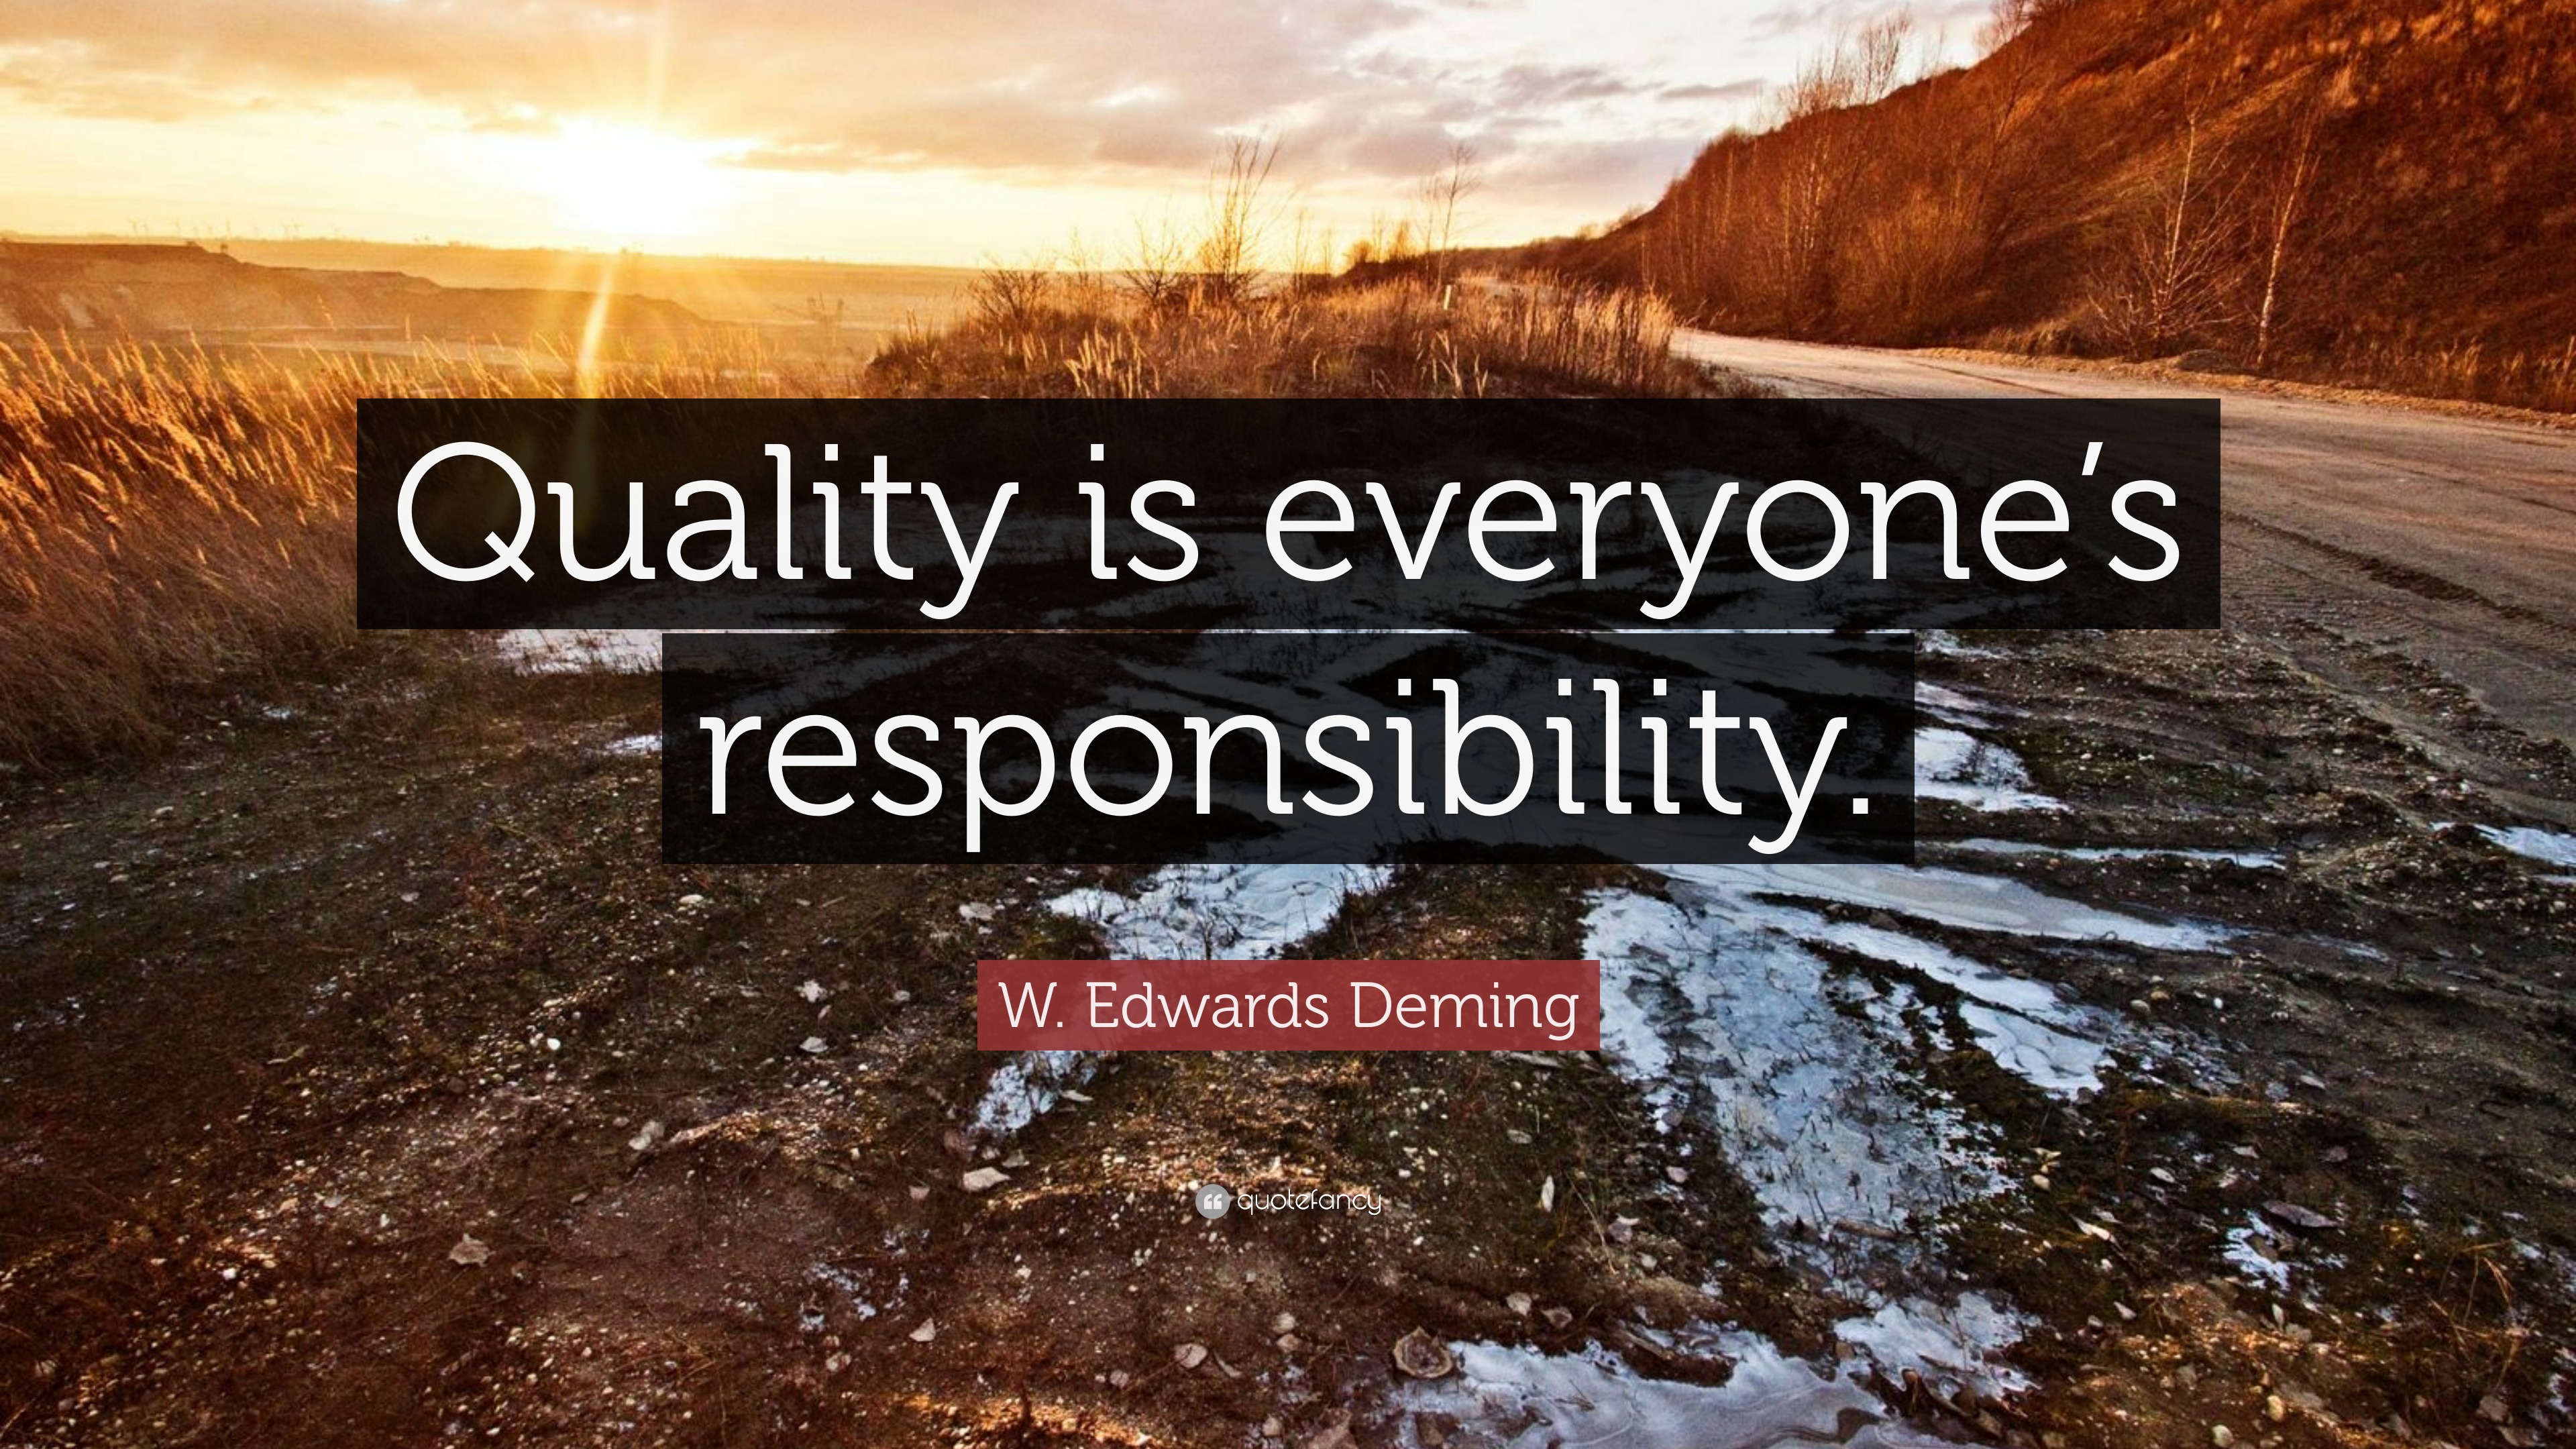 W. Edwards Deming Quote: “Quality is everyone’s responsibility.”